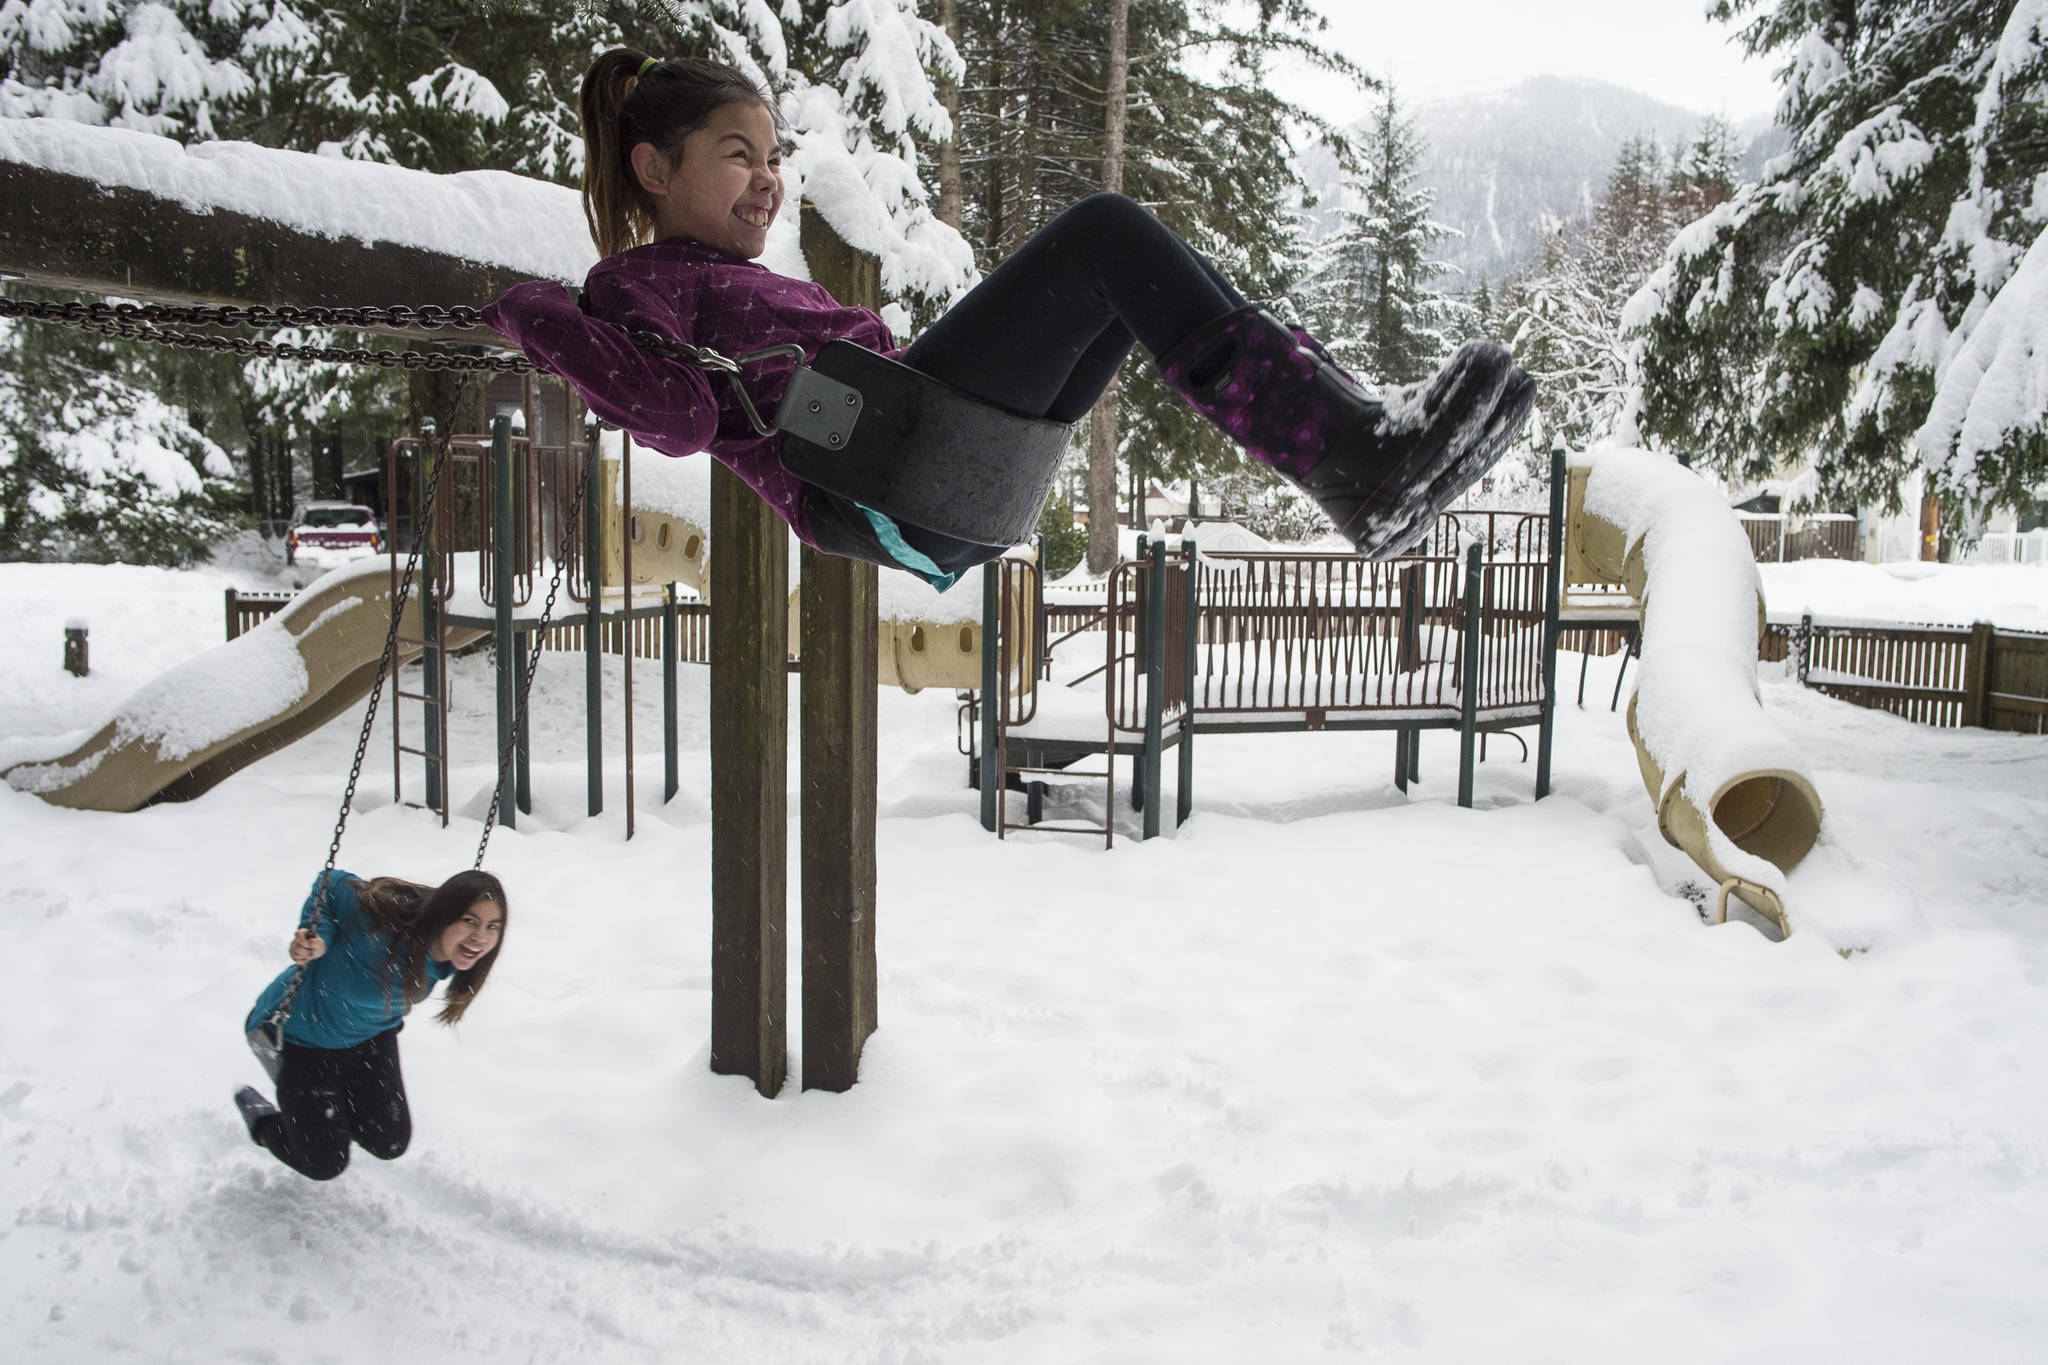 Marci Harriman, 11, top, and Lauryn Dybdahl, 10, makes use of the swings at the Sigoowu Ye Park (Fun Place) in Lemon Creek on Monday, Jan. 21, 2019. The City and Borough of Juneau has updated its Parks & Recreation Master Plan with Lemon Creek referred to as a “park desert.”